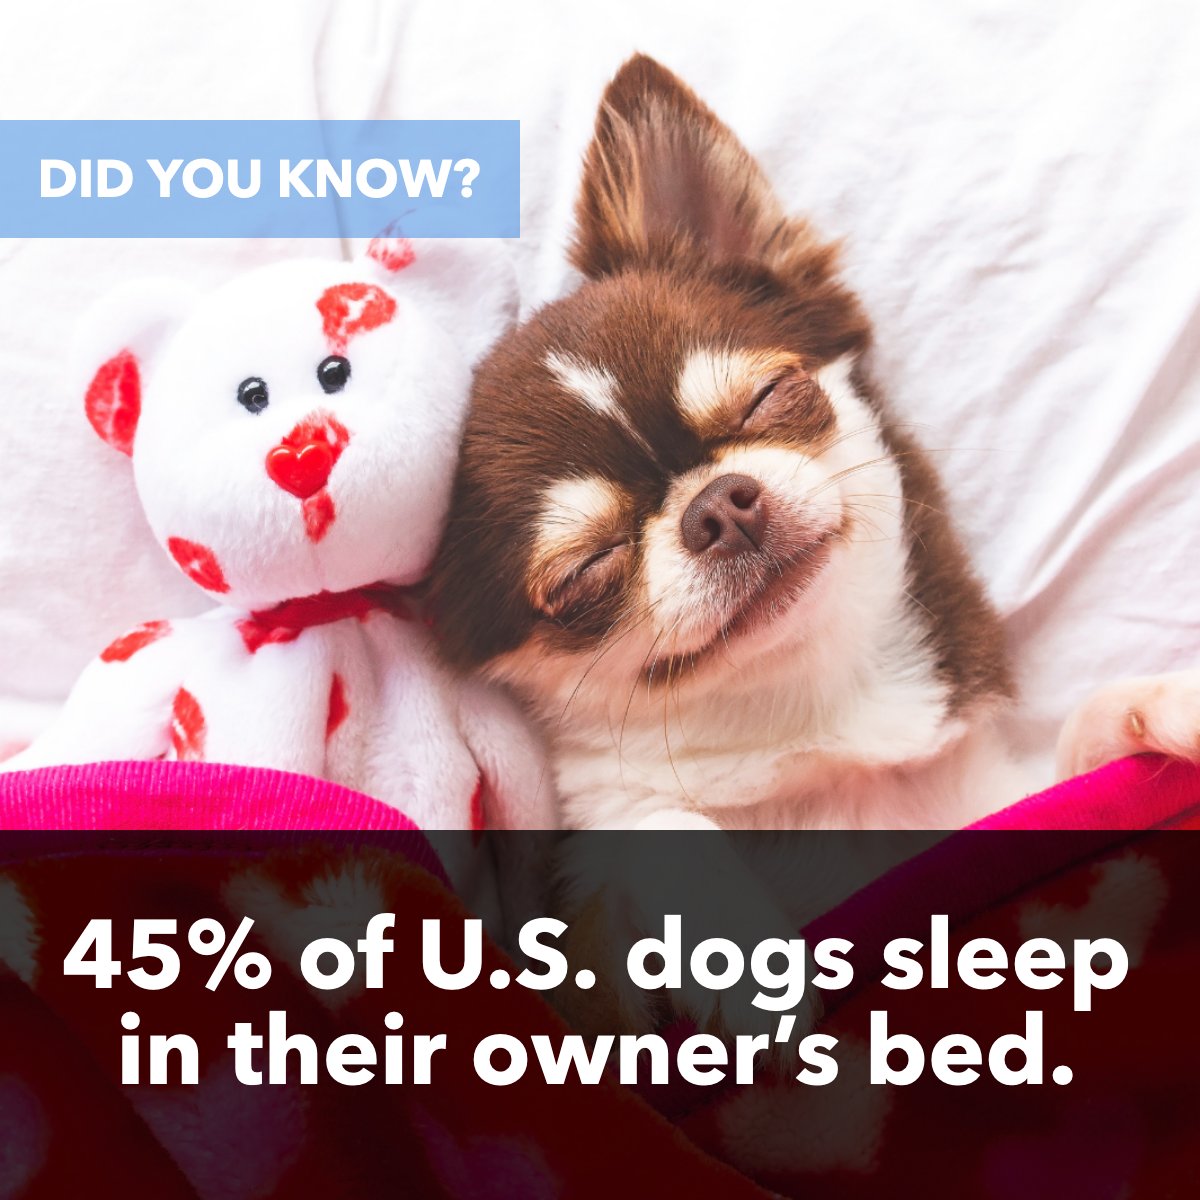 Or... Is the owner's bed actually the dog's bed and he just let us use it? 😅

#funfacts #dogfact #dogfacts #dogfactsoflife #pet #pets
 #Gastonia #GastonHomeOfTheWeek #HanksRealtyGroup #HRG #RealEstateExperts #GastonRealEstate #GastonHomeForSale #GastonOutside